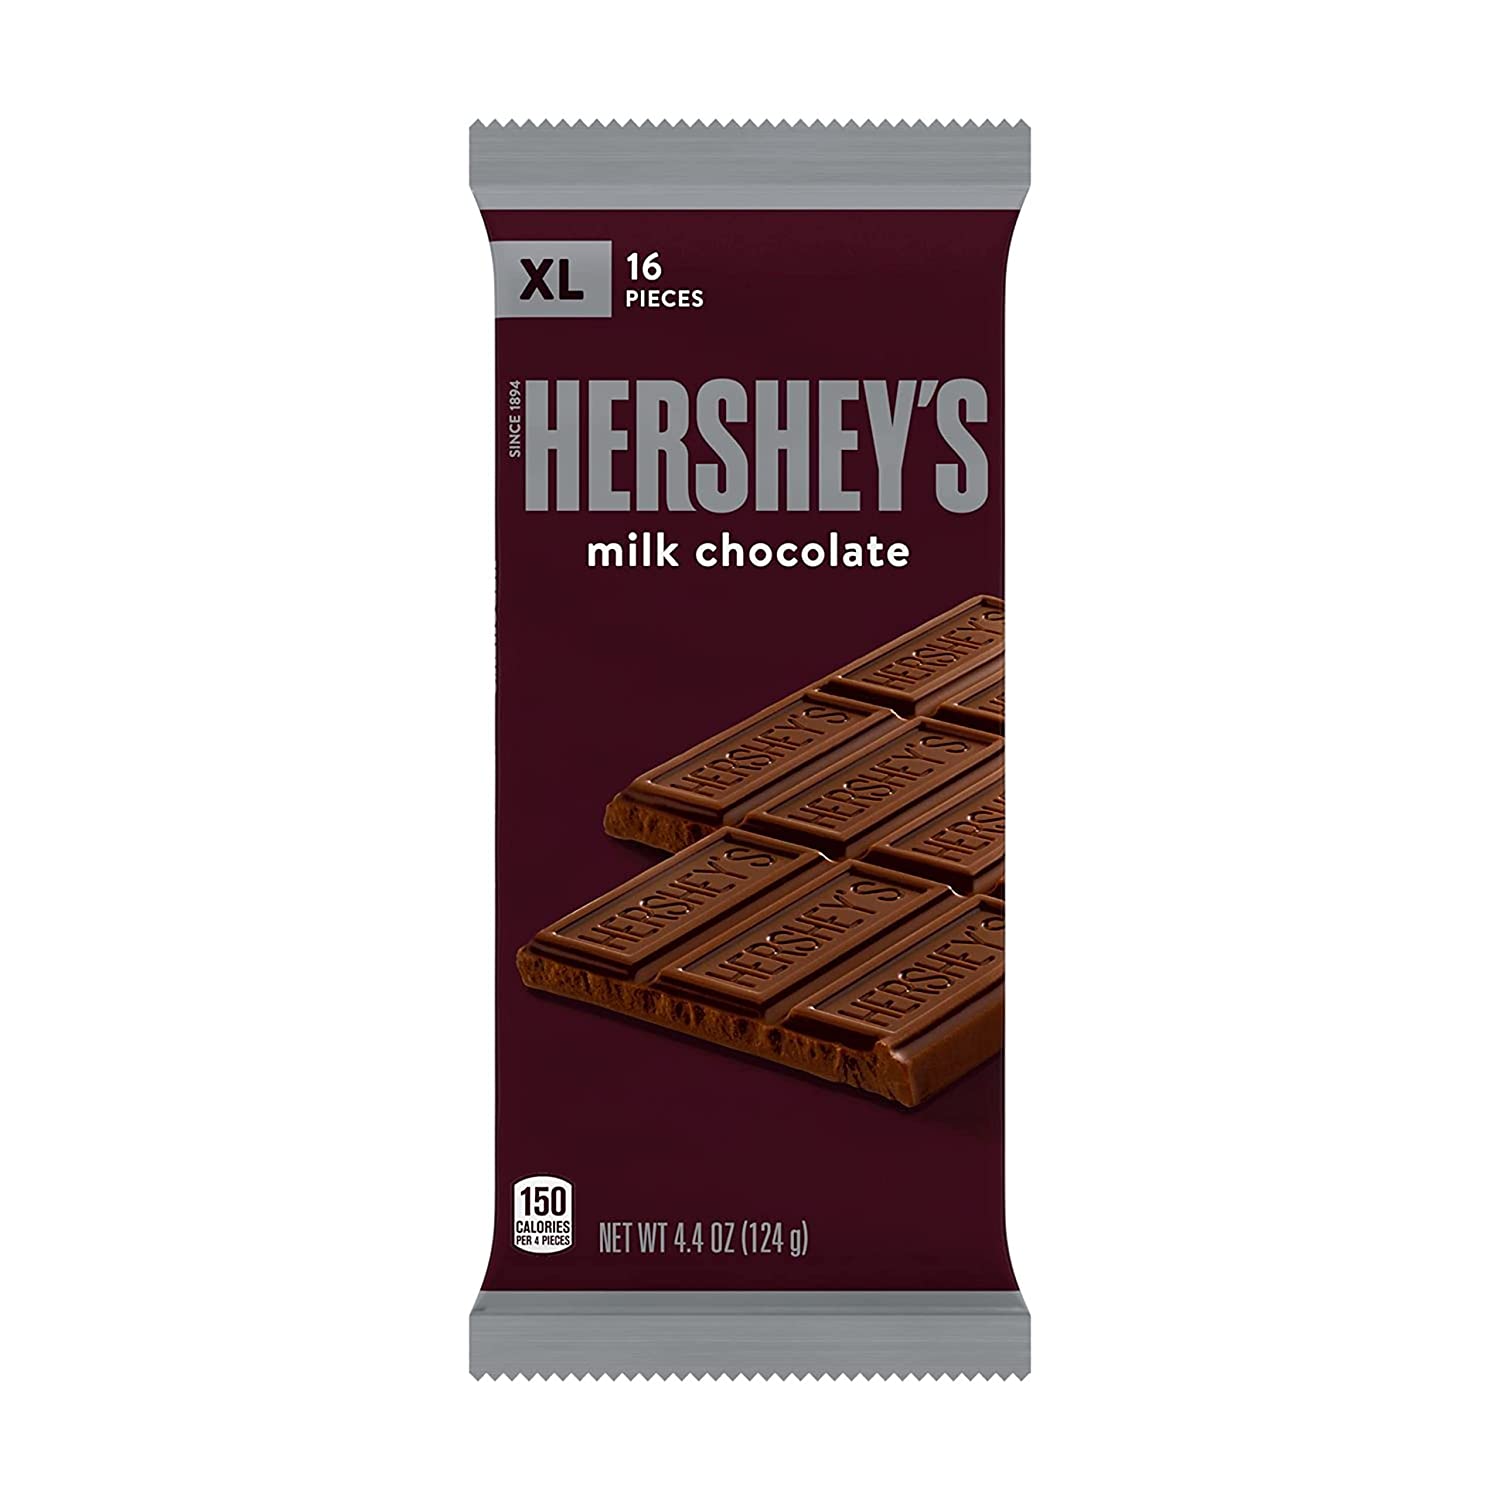 12-Count 4.4-Oz Hershey's Milk Chocolate XL Bars $18.08 ($1.51 each) + Free Shipping w/ Prime or on orders over $25